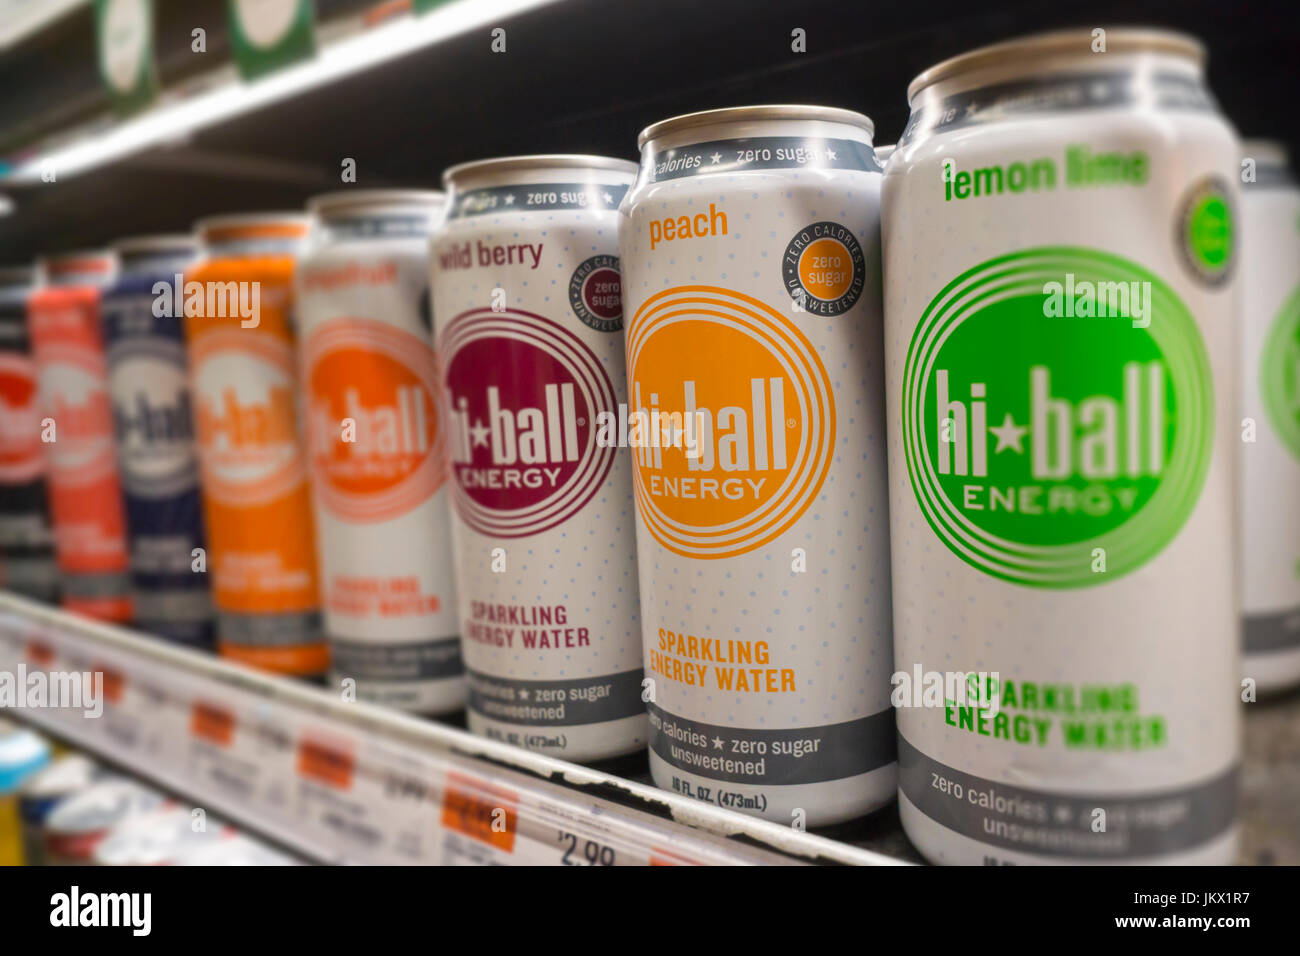 Cans of Hi-Ball energy drinks in a supermarket cooler in New York on  Thursday, July 20, 2017. AB InBev (Anheuser-Busch) announced it will  acquire Hiball Energy the maker of the organic Hi-Ball